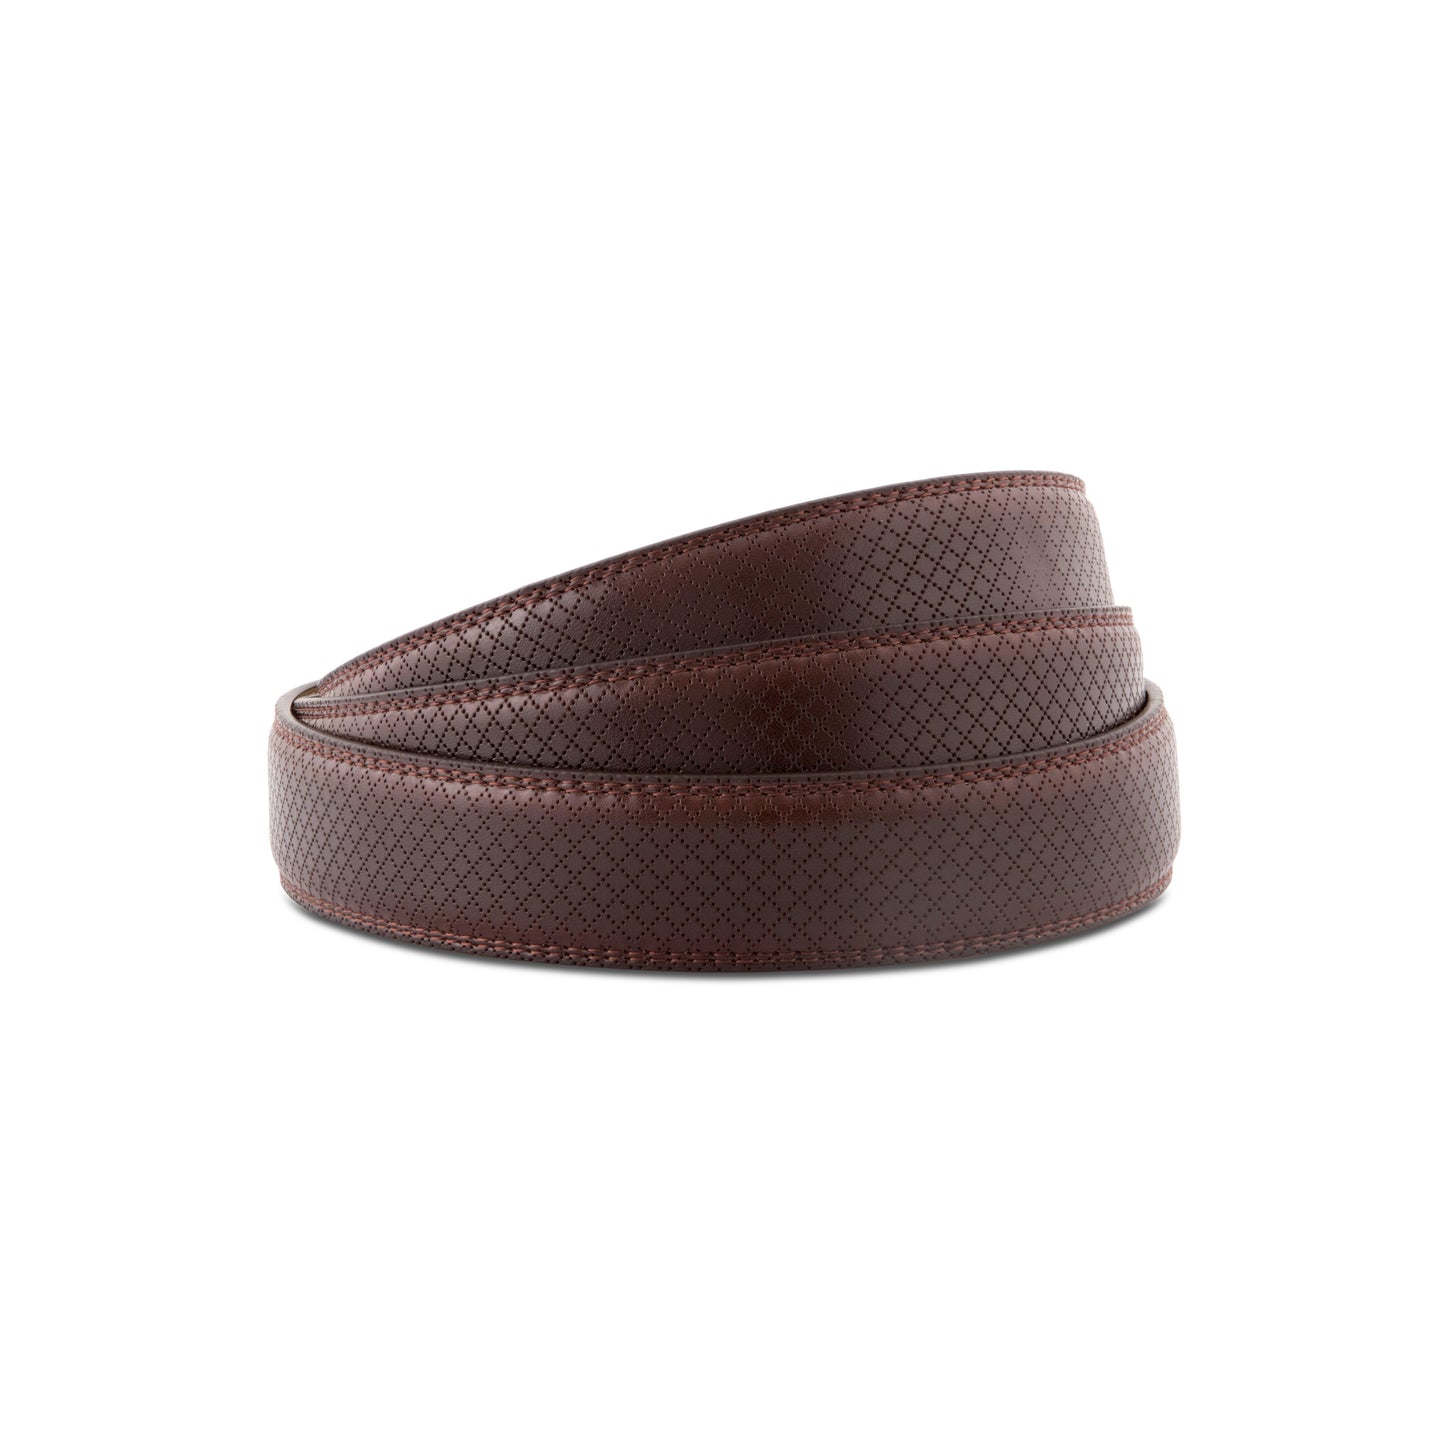 THEO BROWN STRAP 3cm/ 1.25"